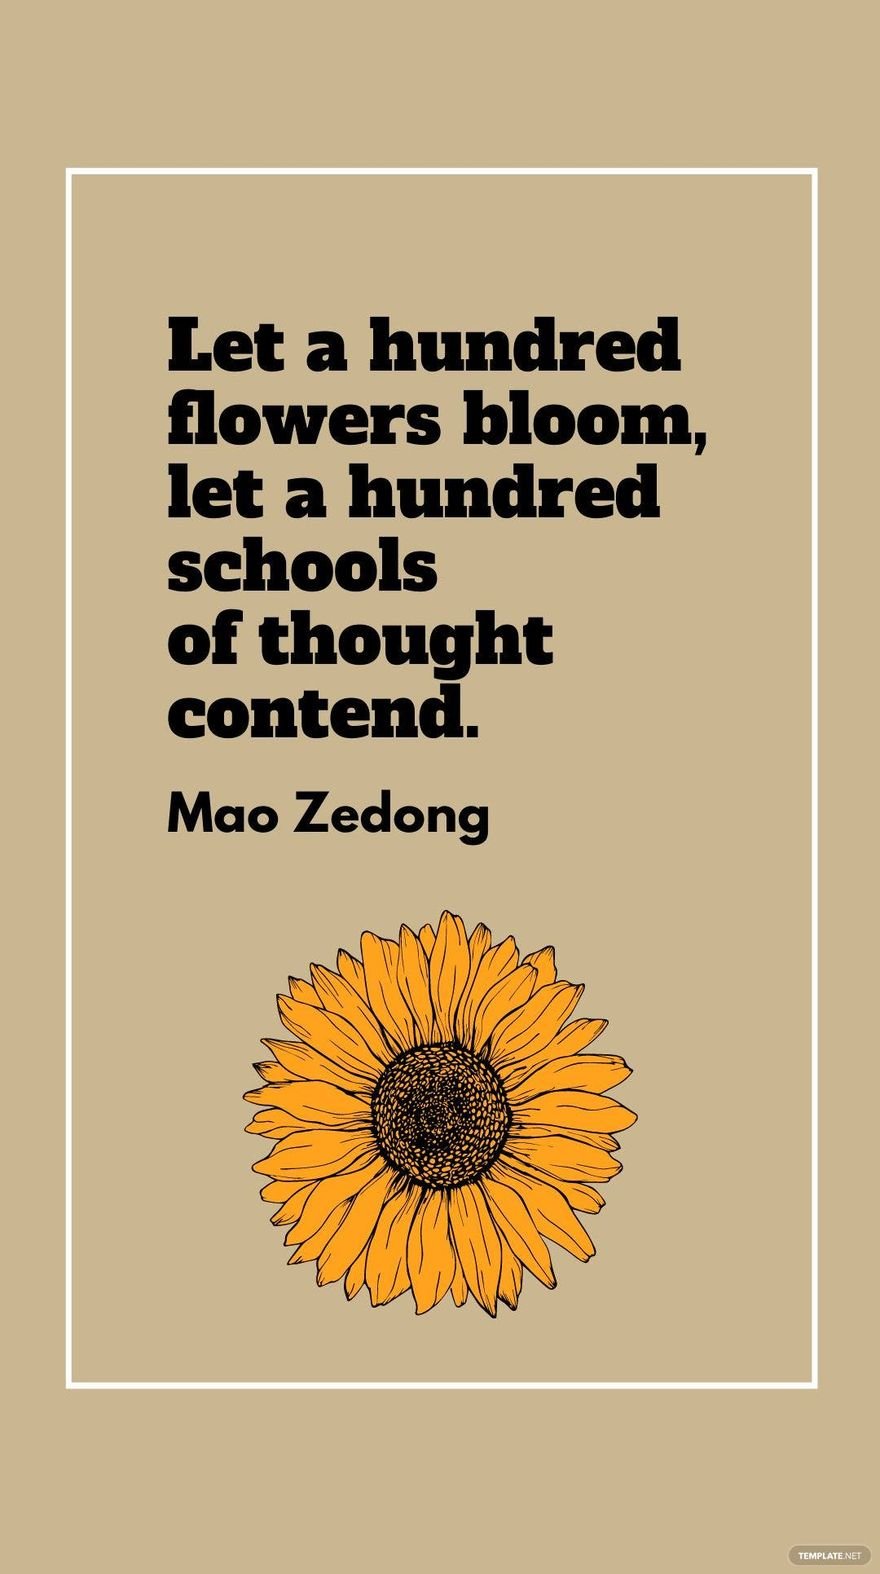 Free Mao Zedong - Let a hundred flowers bloom, let a hundred schools of thought contend. in JPG